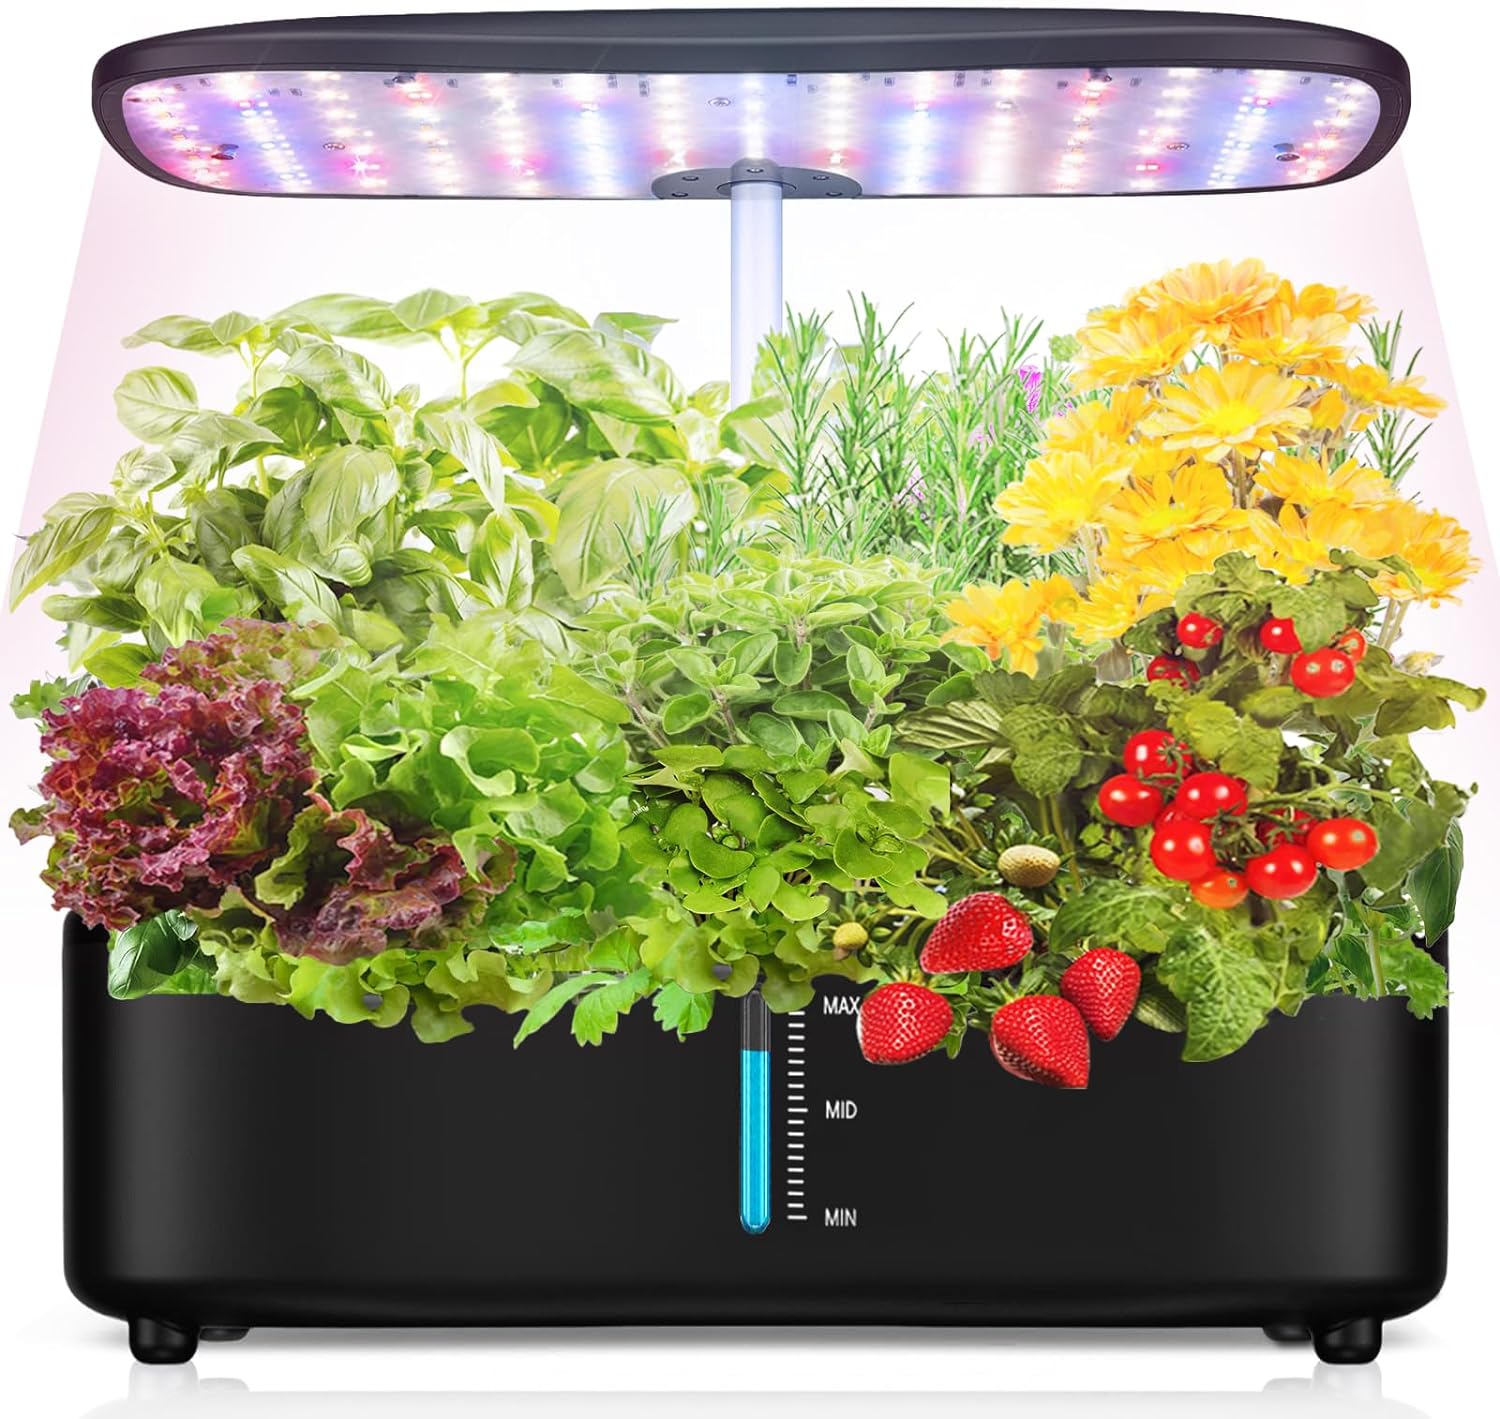 Fulsren Hydroponic Indoor Garden System with LED Grow Lights